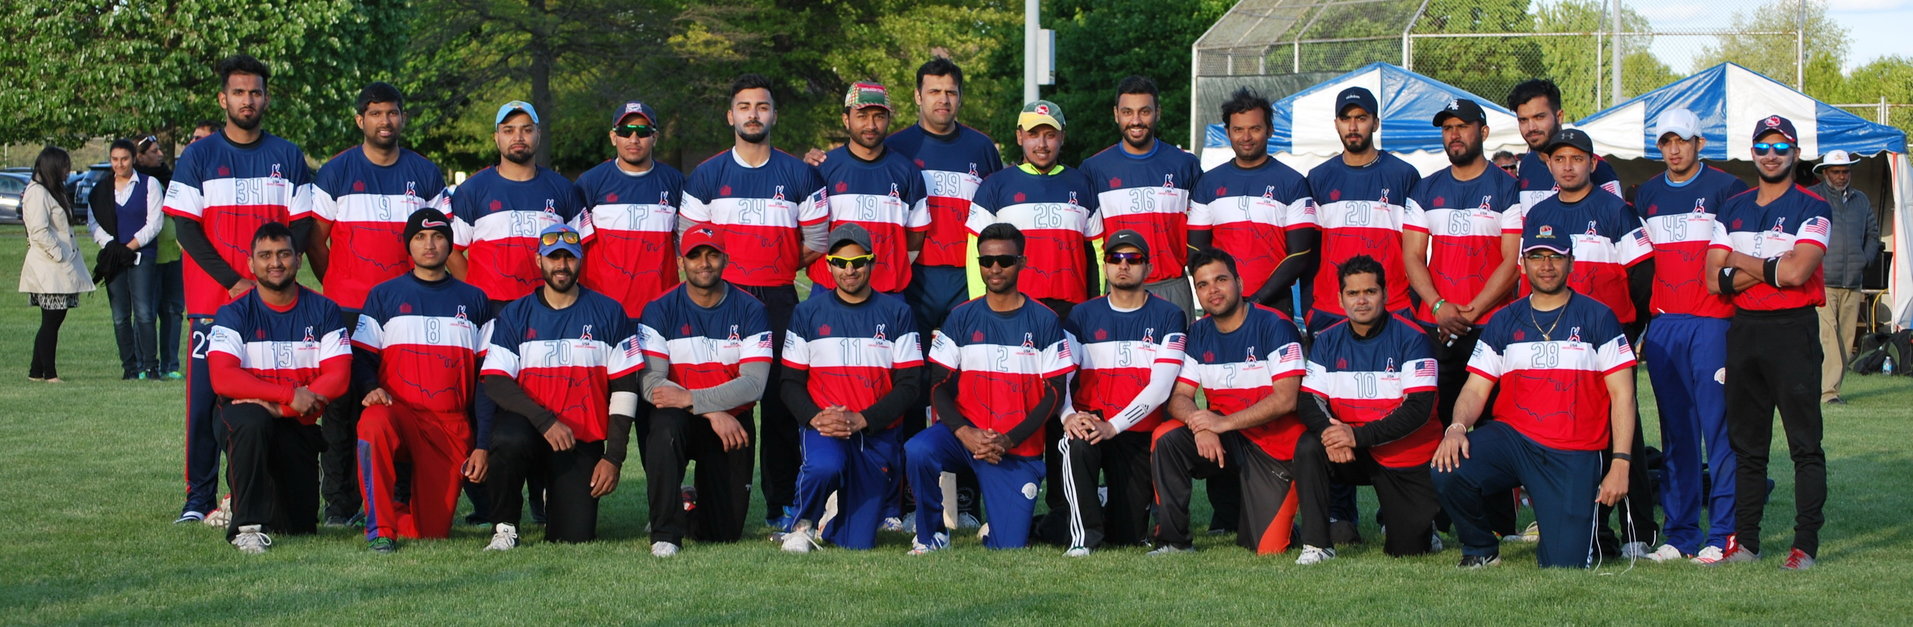 USA Cricket Combines return for 2018